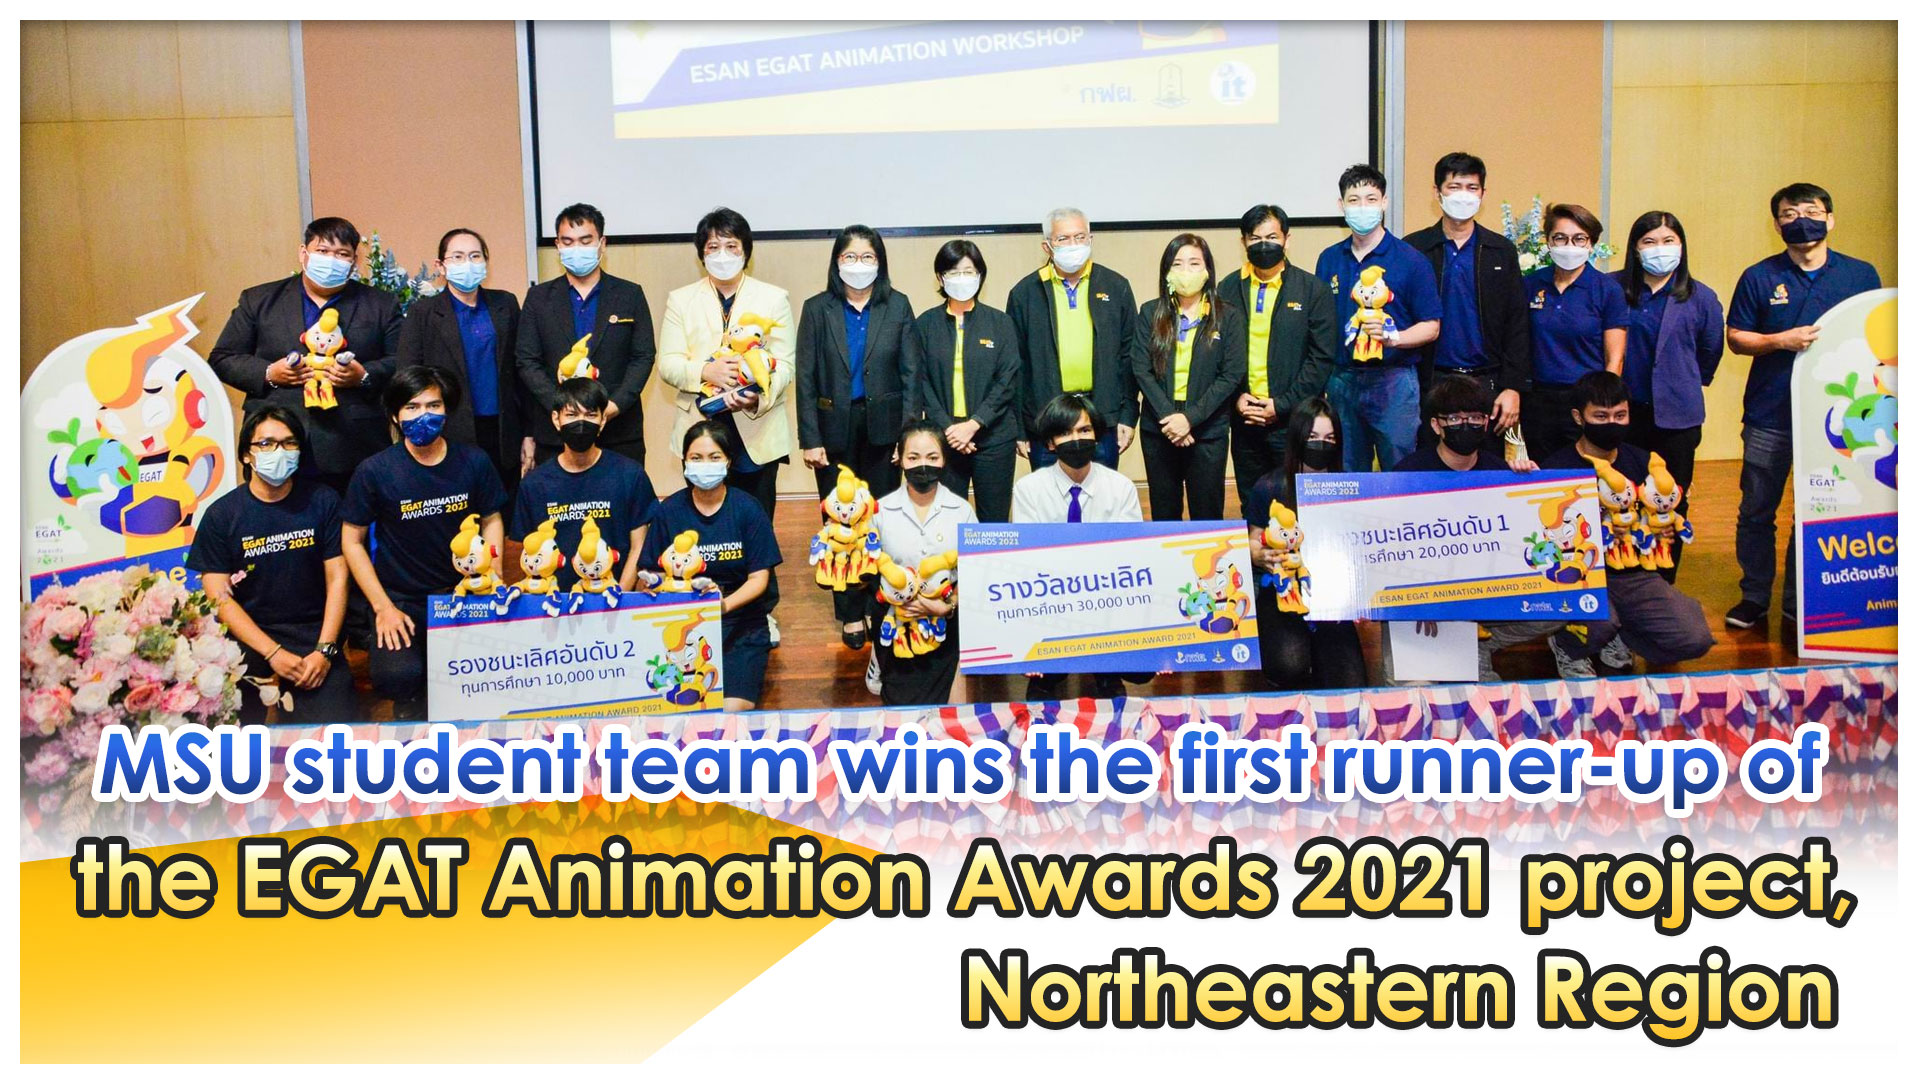 MSU student team wins the first runner-up of the EGAT Animation Awards 2021 project, Northeastern Region